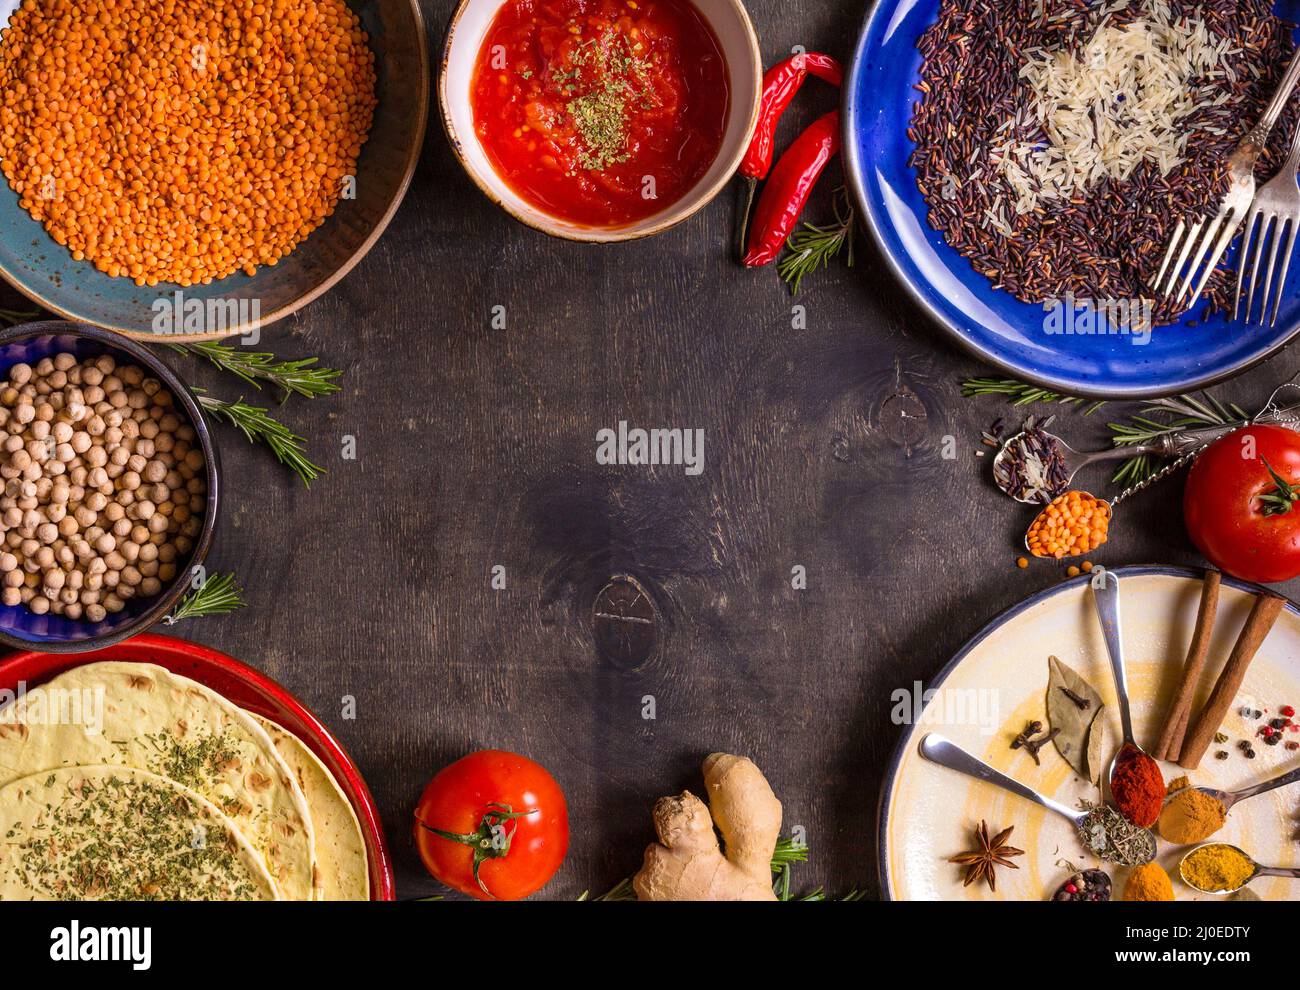 Ingredients for indian or eastern cuisine Stock Photo